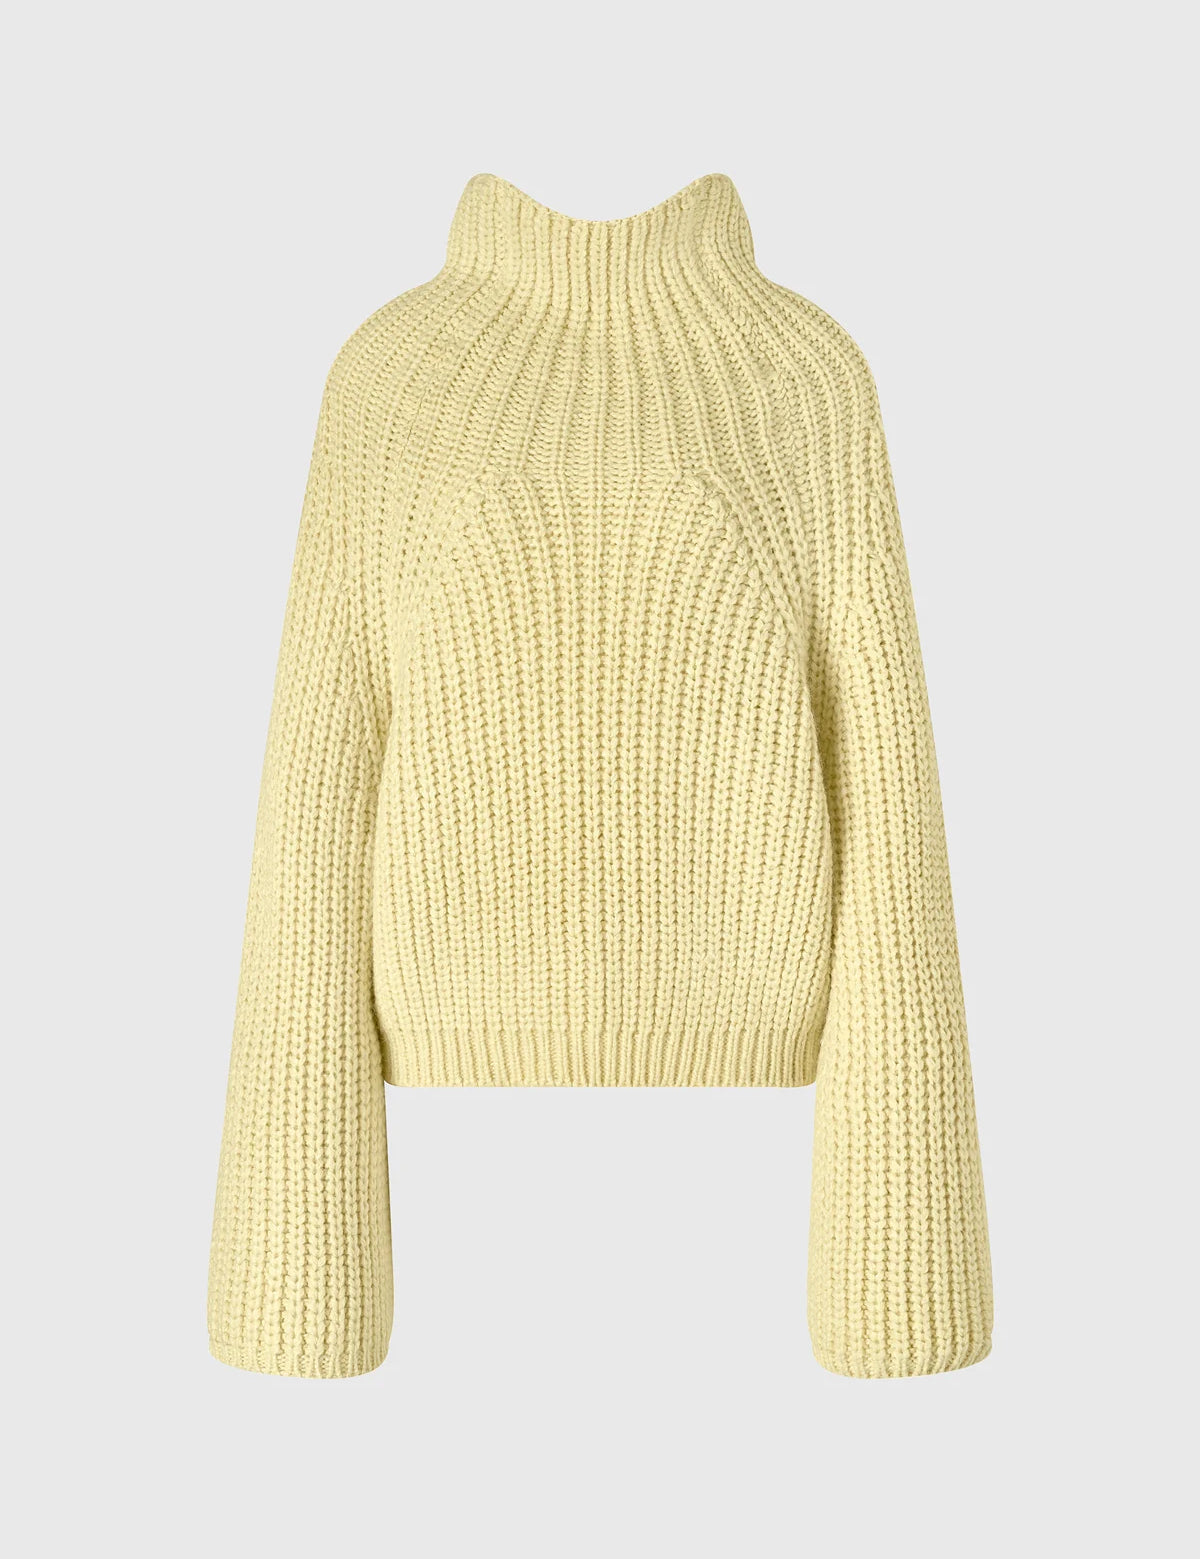 slouchy_high-neck_sweater_le_07.webp